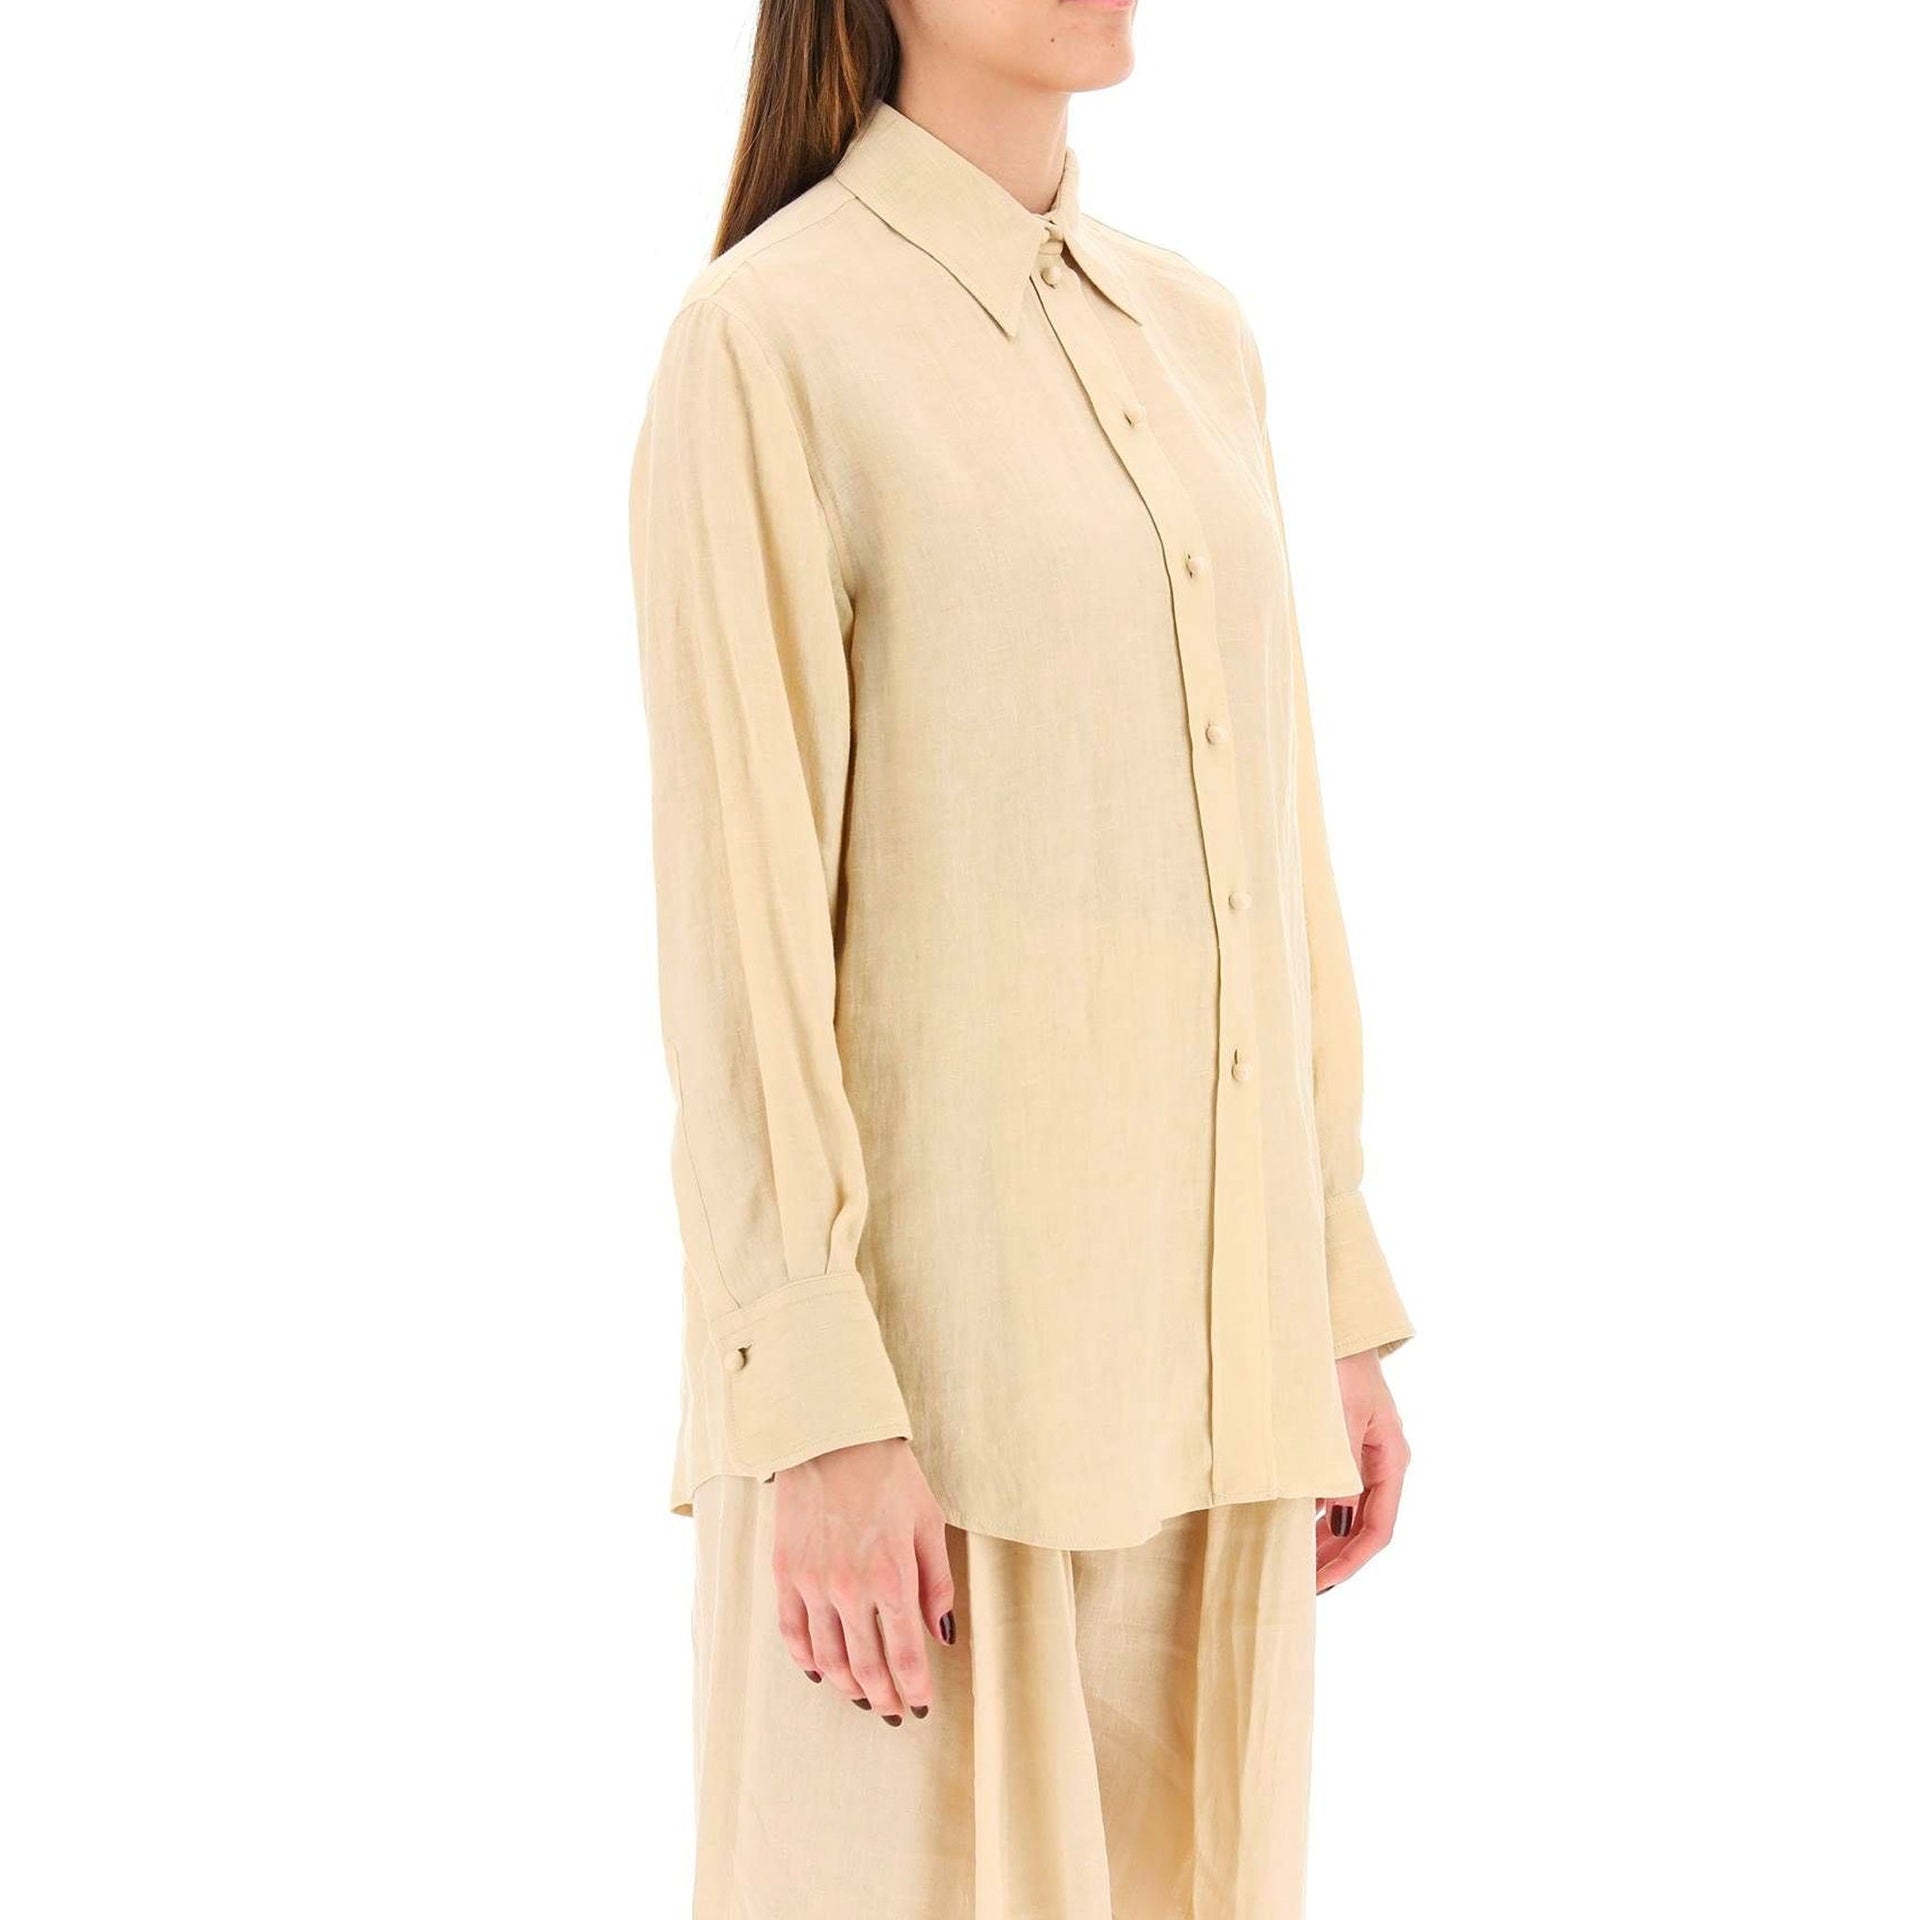 CHLOE-OUTLET-SALE-Chloe-Linen-Shirt-Shirts-BROWN-42-ARCHIVE-COLLECTION-2.jpg